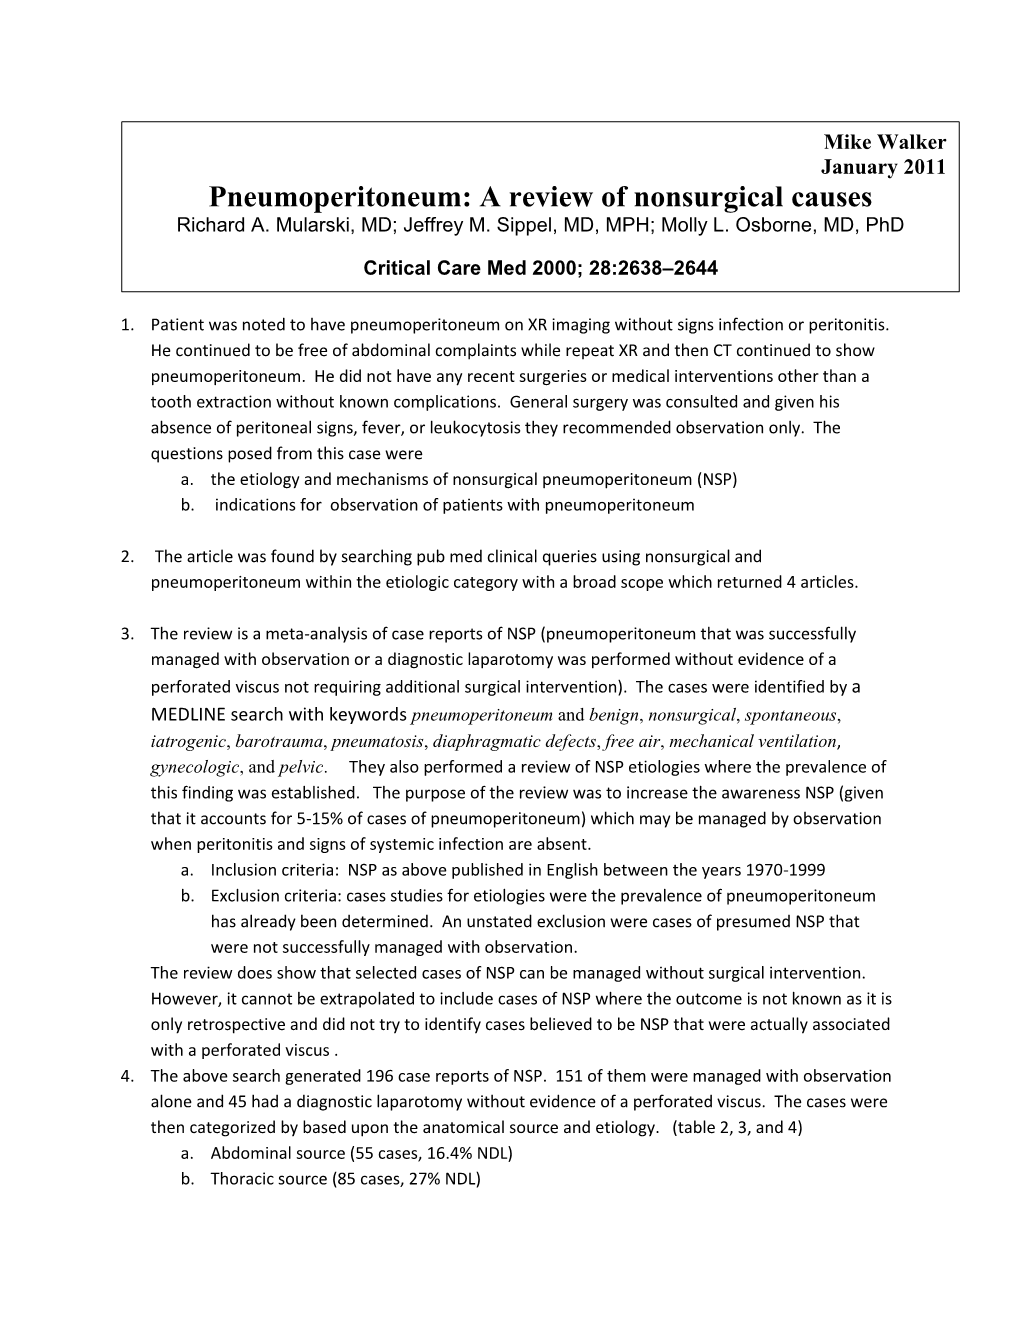 Pneumoperitoneum: a Review of Nonsurgical Causes Richard A